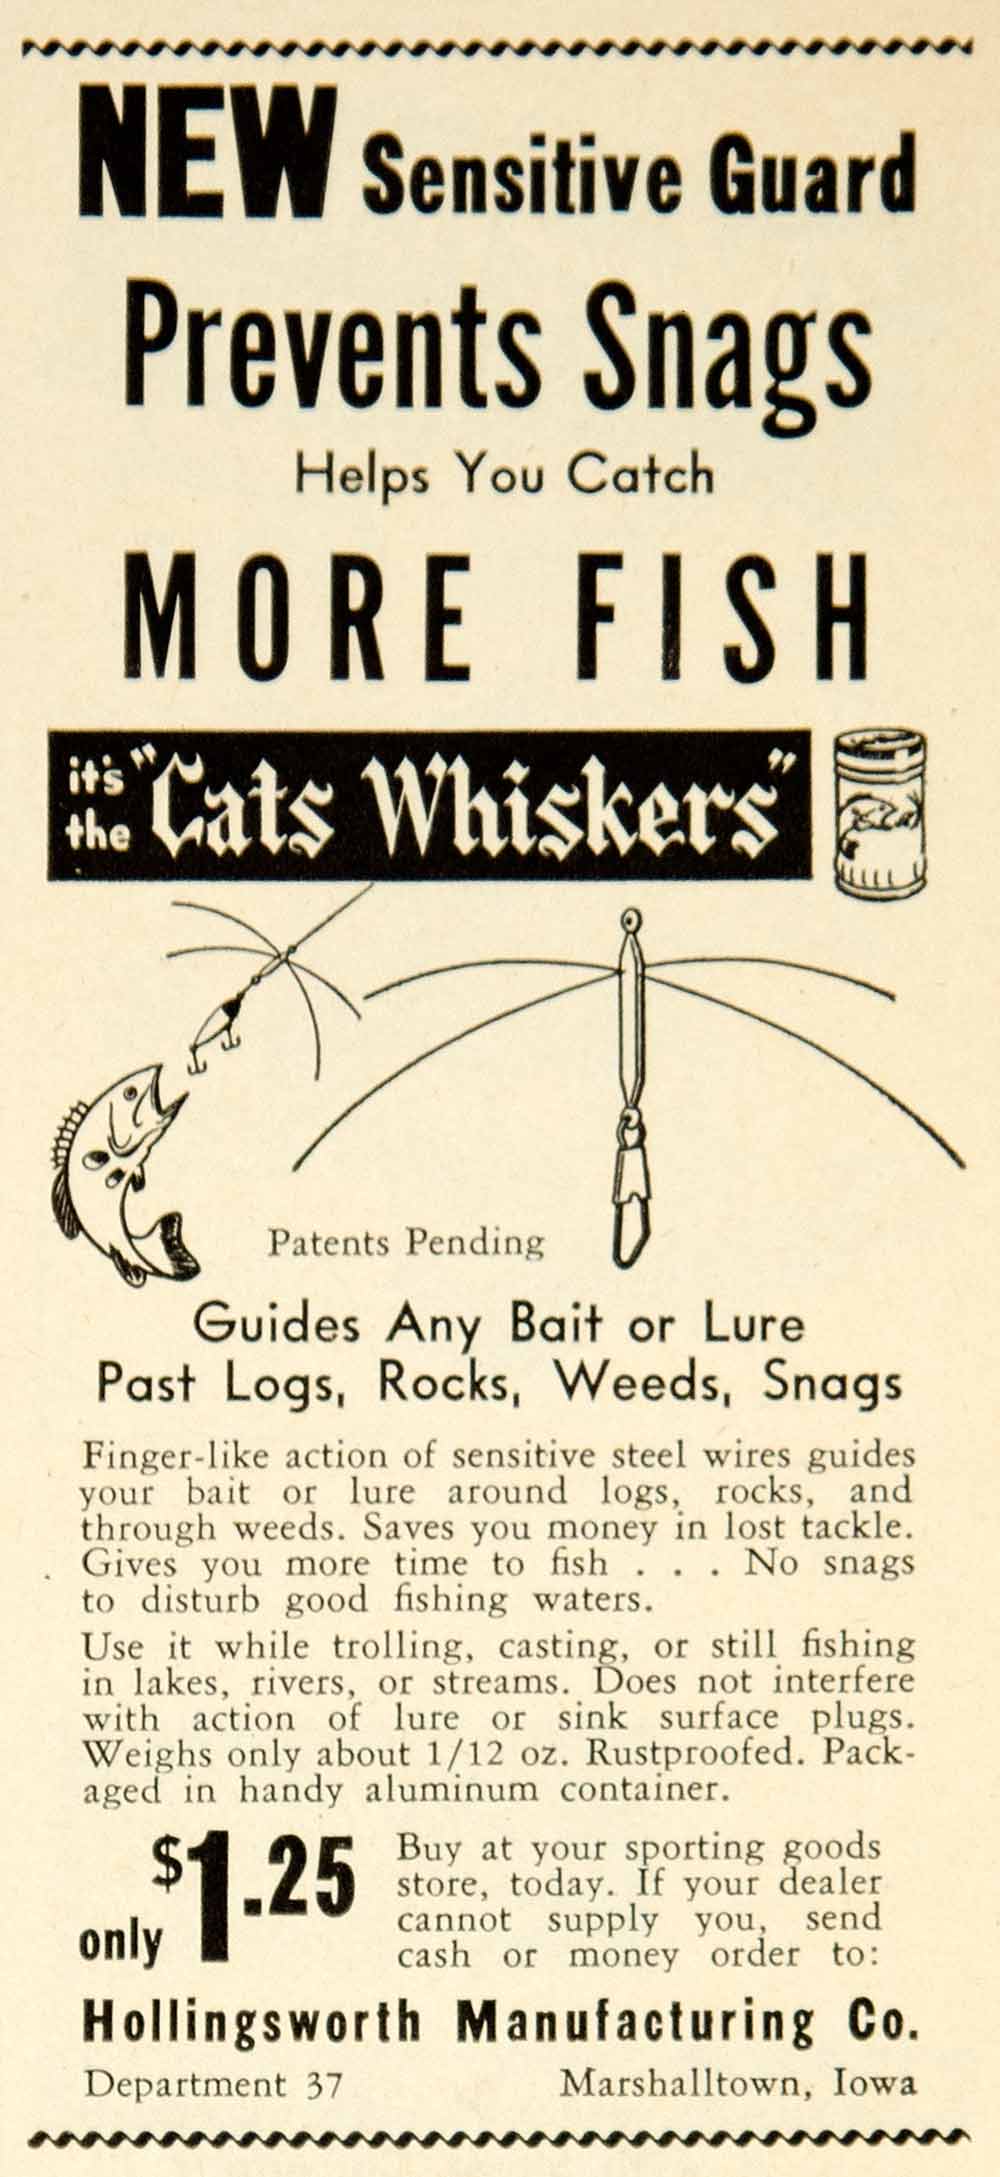 1948 WOOD'S Fishing Lure PRINT AD Dipsy Doodle Doodler Spot Tail